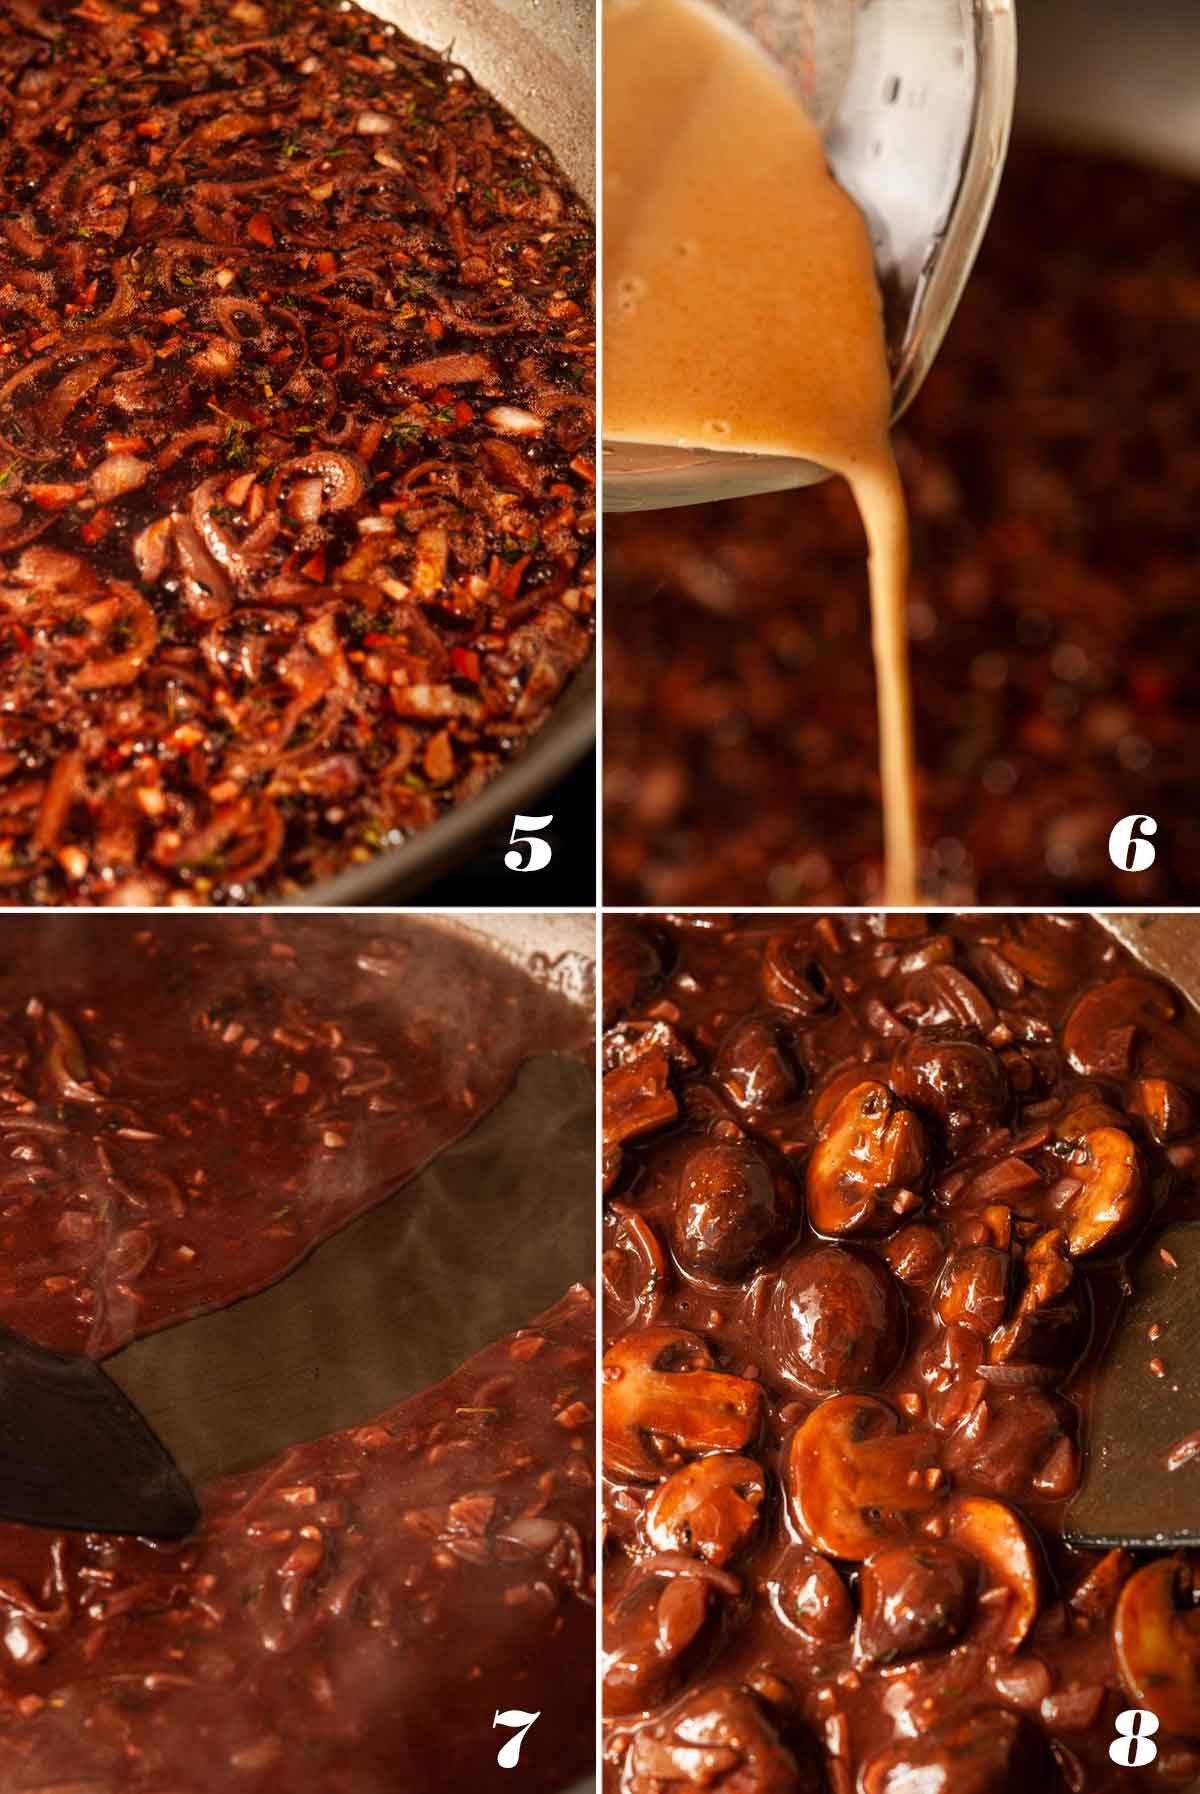 A collage of 4 numbered images showing how to make red wine mushroom sauce.